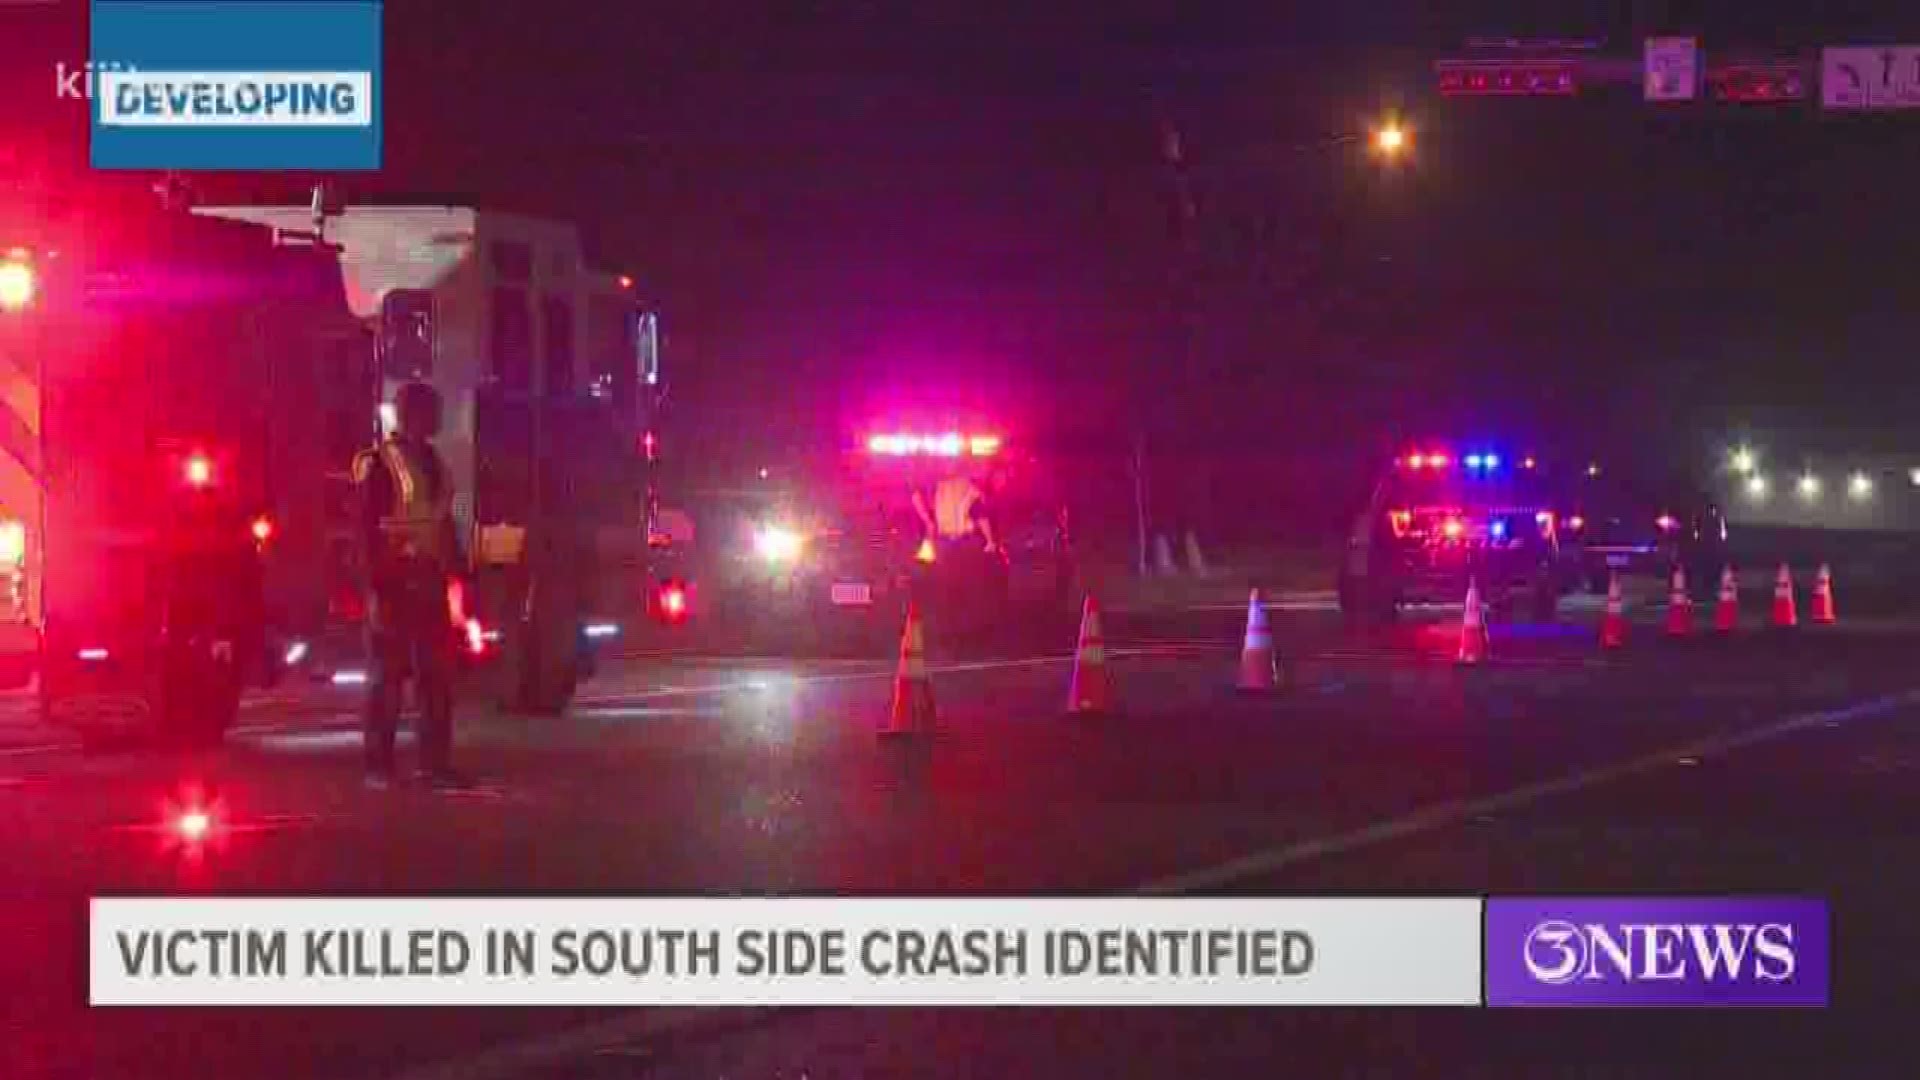 The Nueces County Medical Examiner's Office has identified the victim of a fatal crash that happened Sunday night in Corpus Christi's southside.